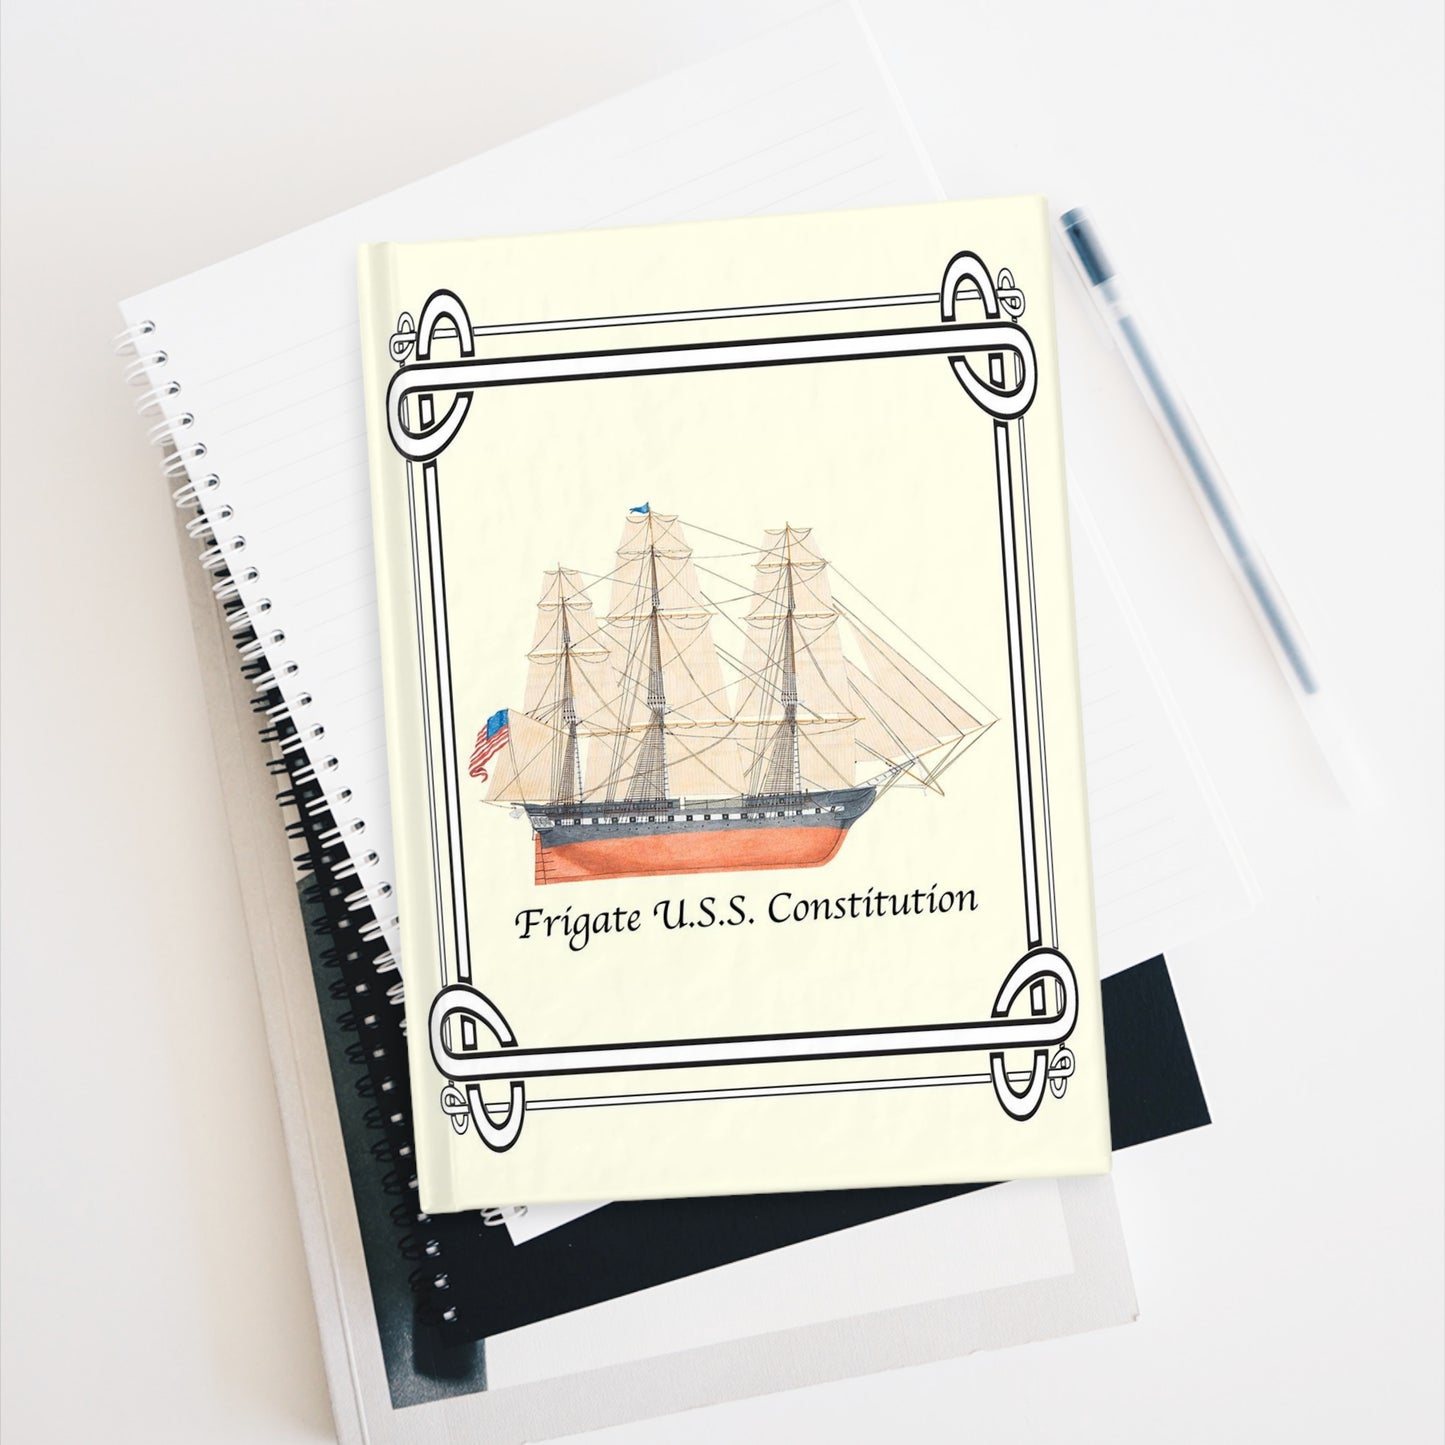 Frigate U.S.S. Constitution Lined Page Journal